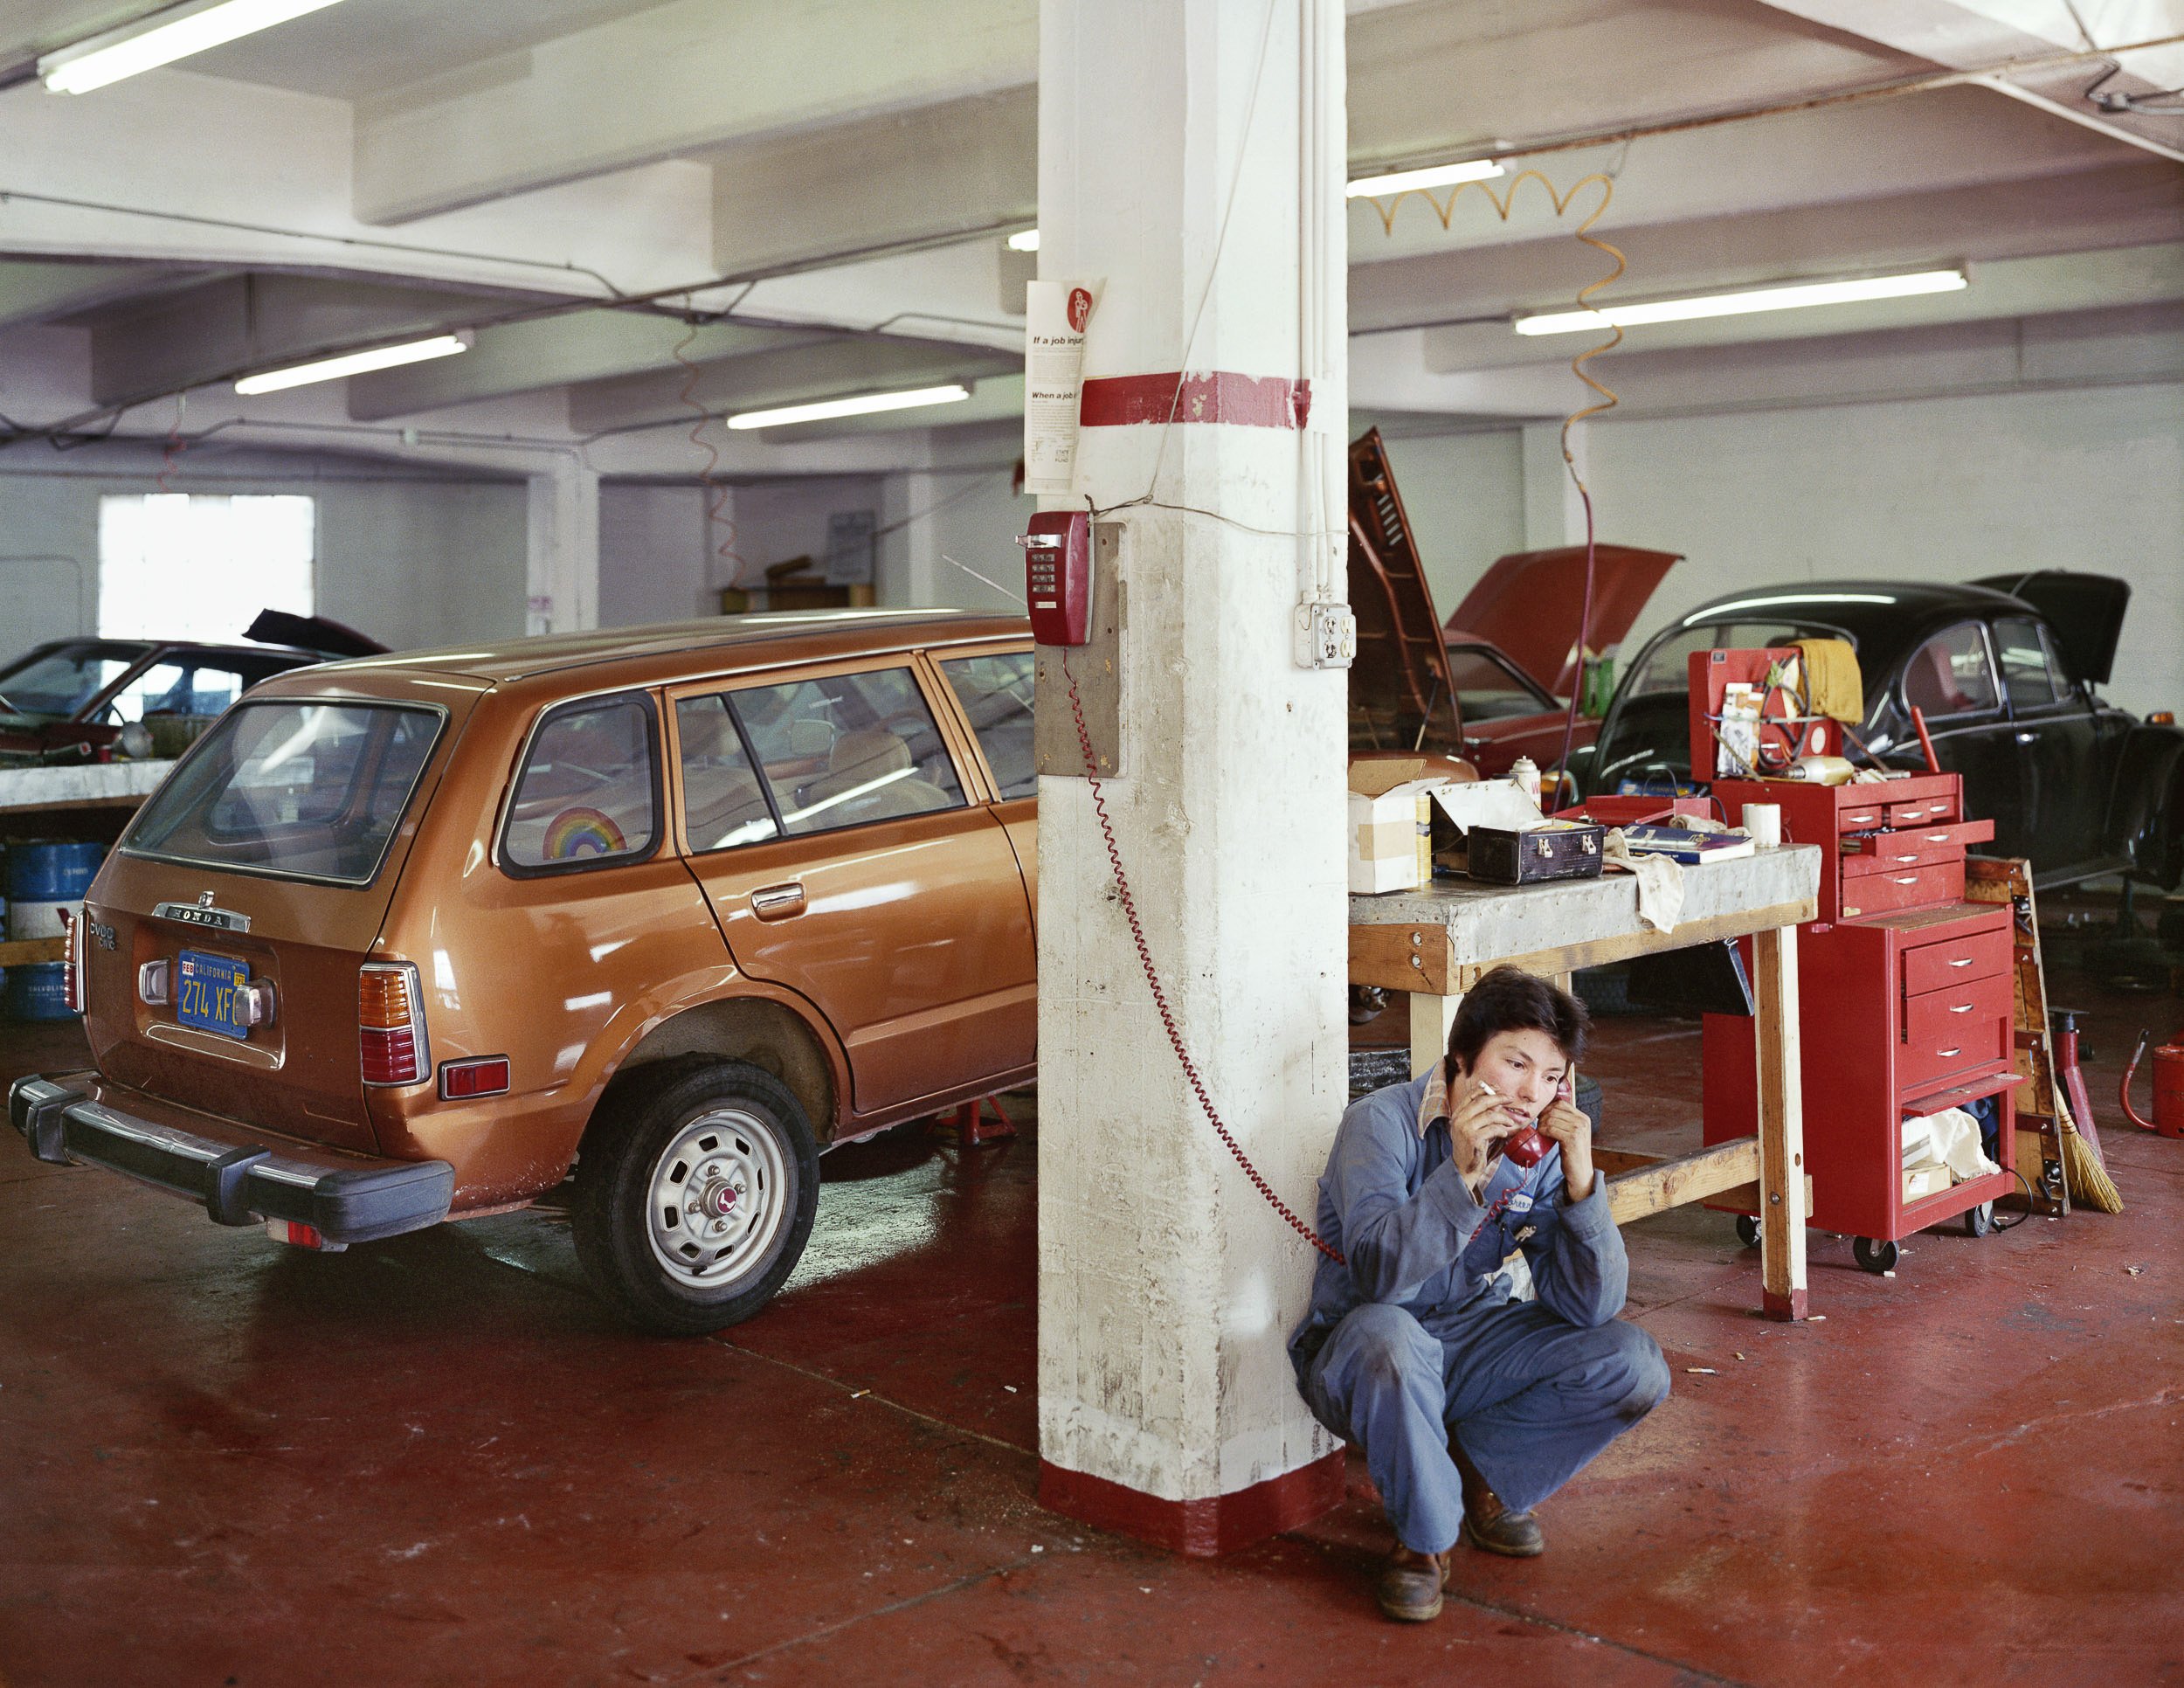   Labyris Auto Repair, "Complete Car Care By Women,” 240 6th Street, 1982  